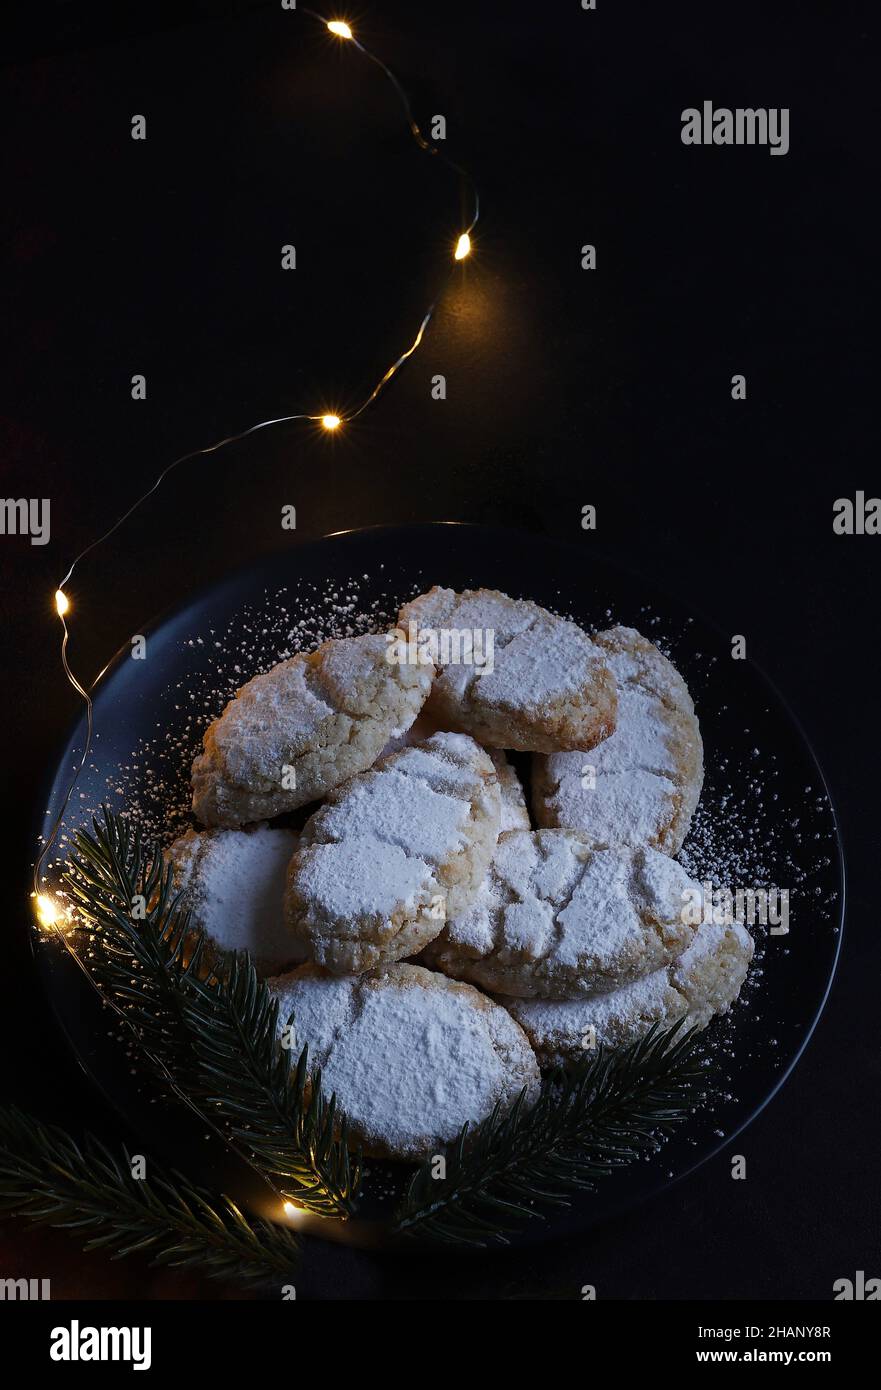 Ricciarelli pastries, typical Sienese Christmas sweet made with almond on dark background. Christmas decorations. Traditional Italian desserts. Stock Photo